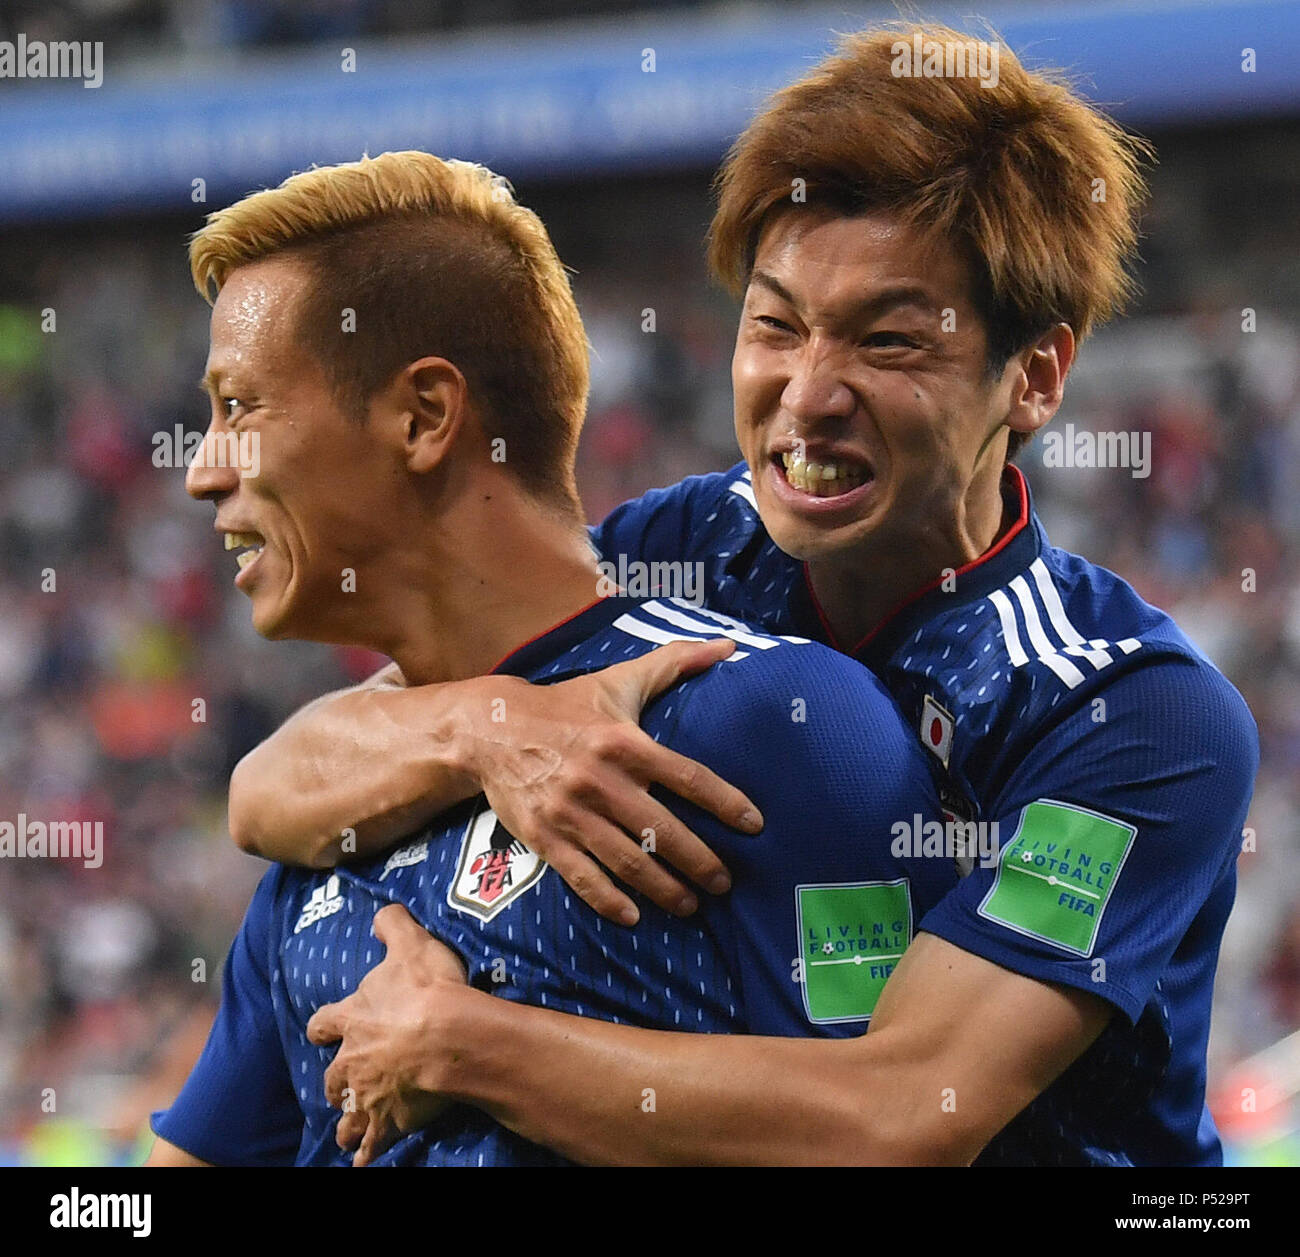 Yekaterinburg, Russia. 24th June, 2018. Keisuke Honda (L) of Japan celebrates his scoring with teammate during the 2018 FIFA World Cup Group H match between Japan and Senegal in Yekaterinburg, Russia, June 24, 2018. Credit: Liu Dawei/Xinhua/Alamy Live News Stock Photo